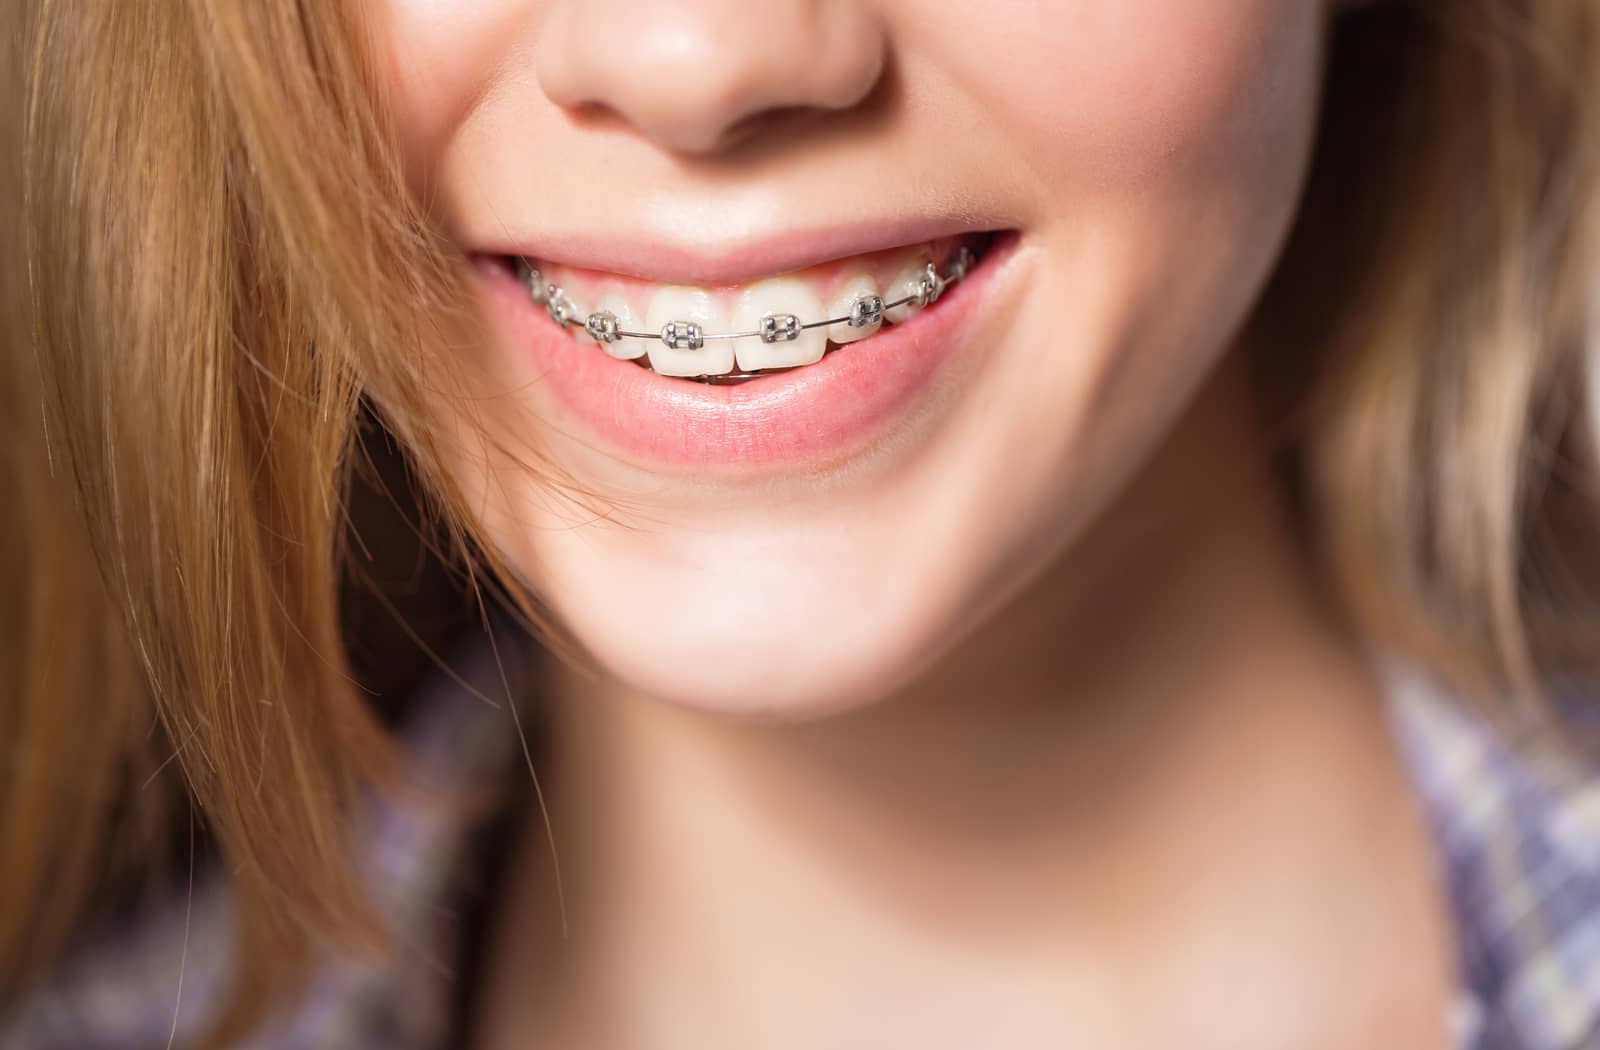 Straight Talk: Invisalign First for Early Orthodontic Treatment